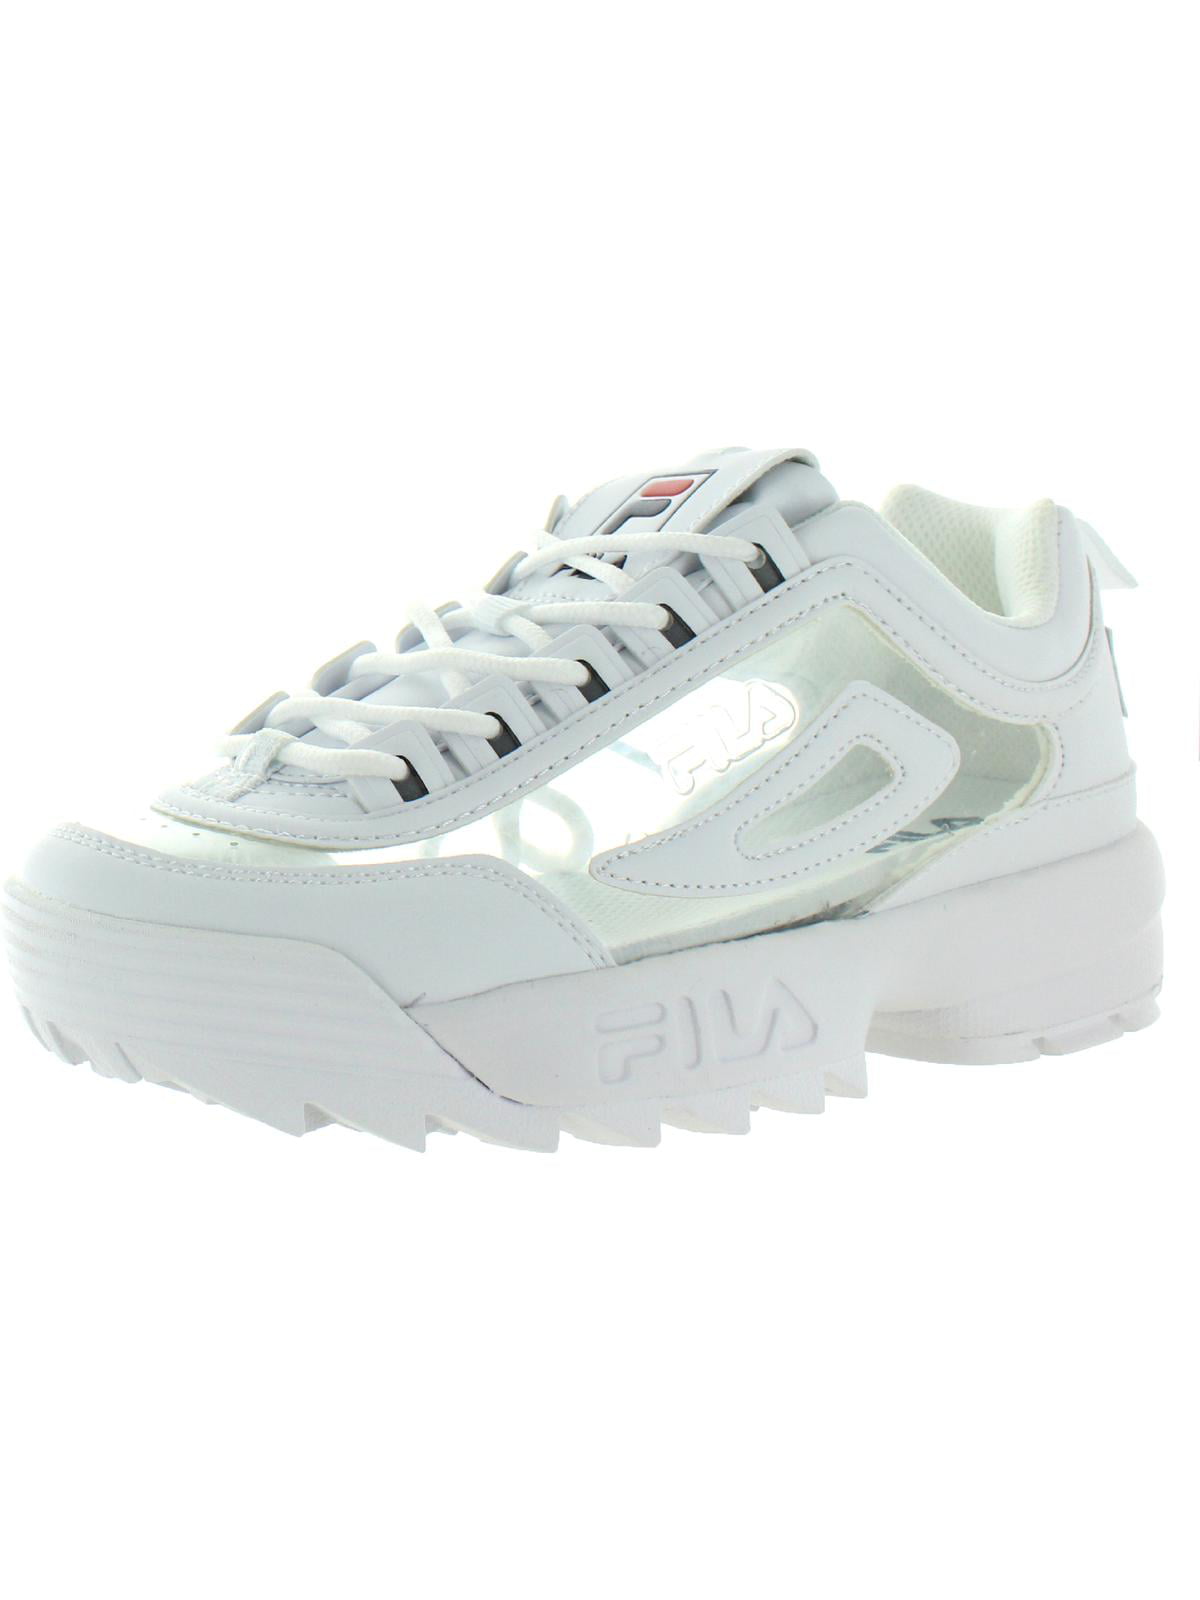 Women's Disruptor Ii White / Red Ankle-High Wedge Sneakers - 5M - Walmart.com